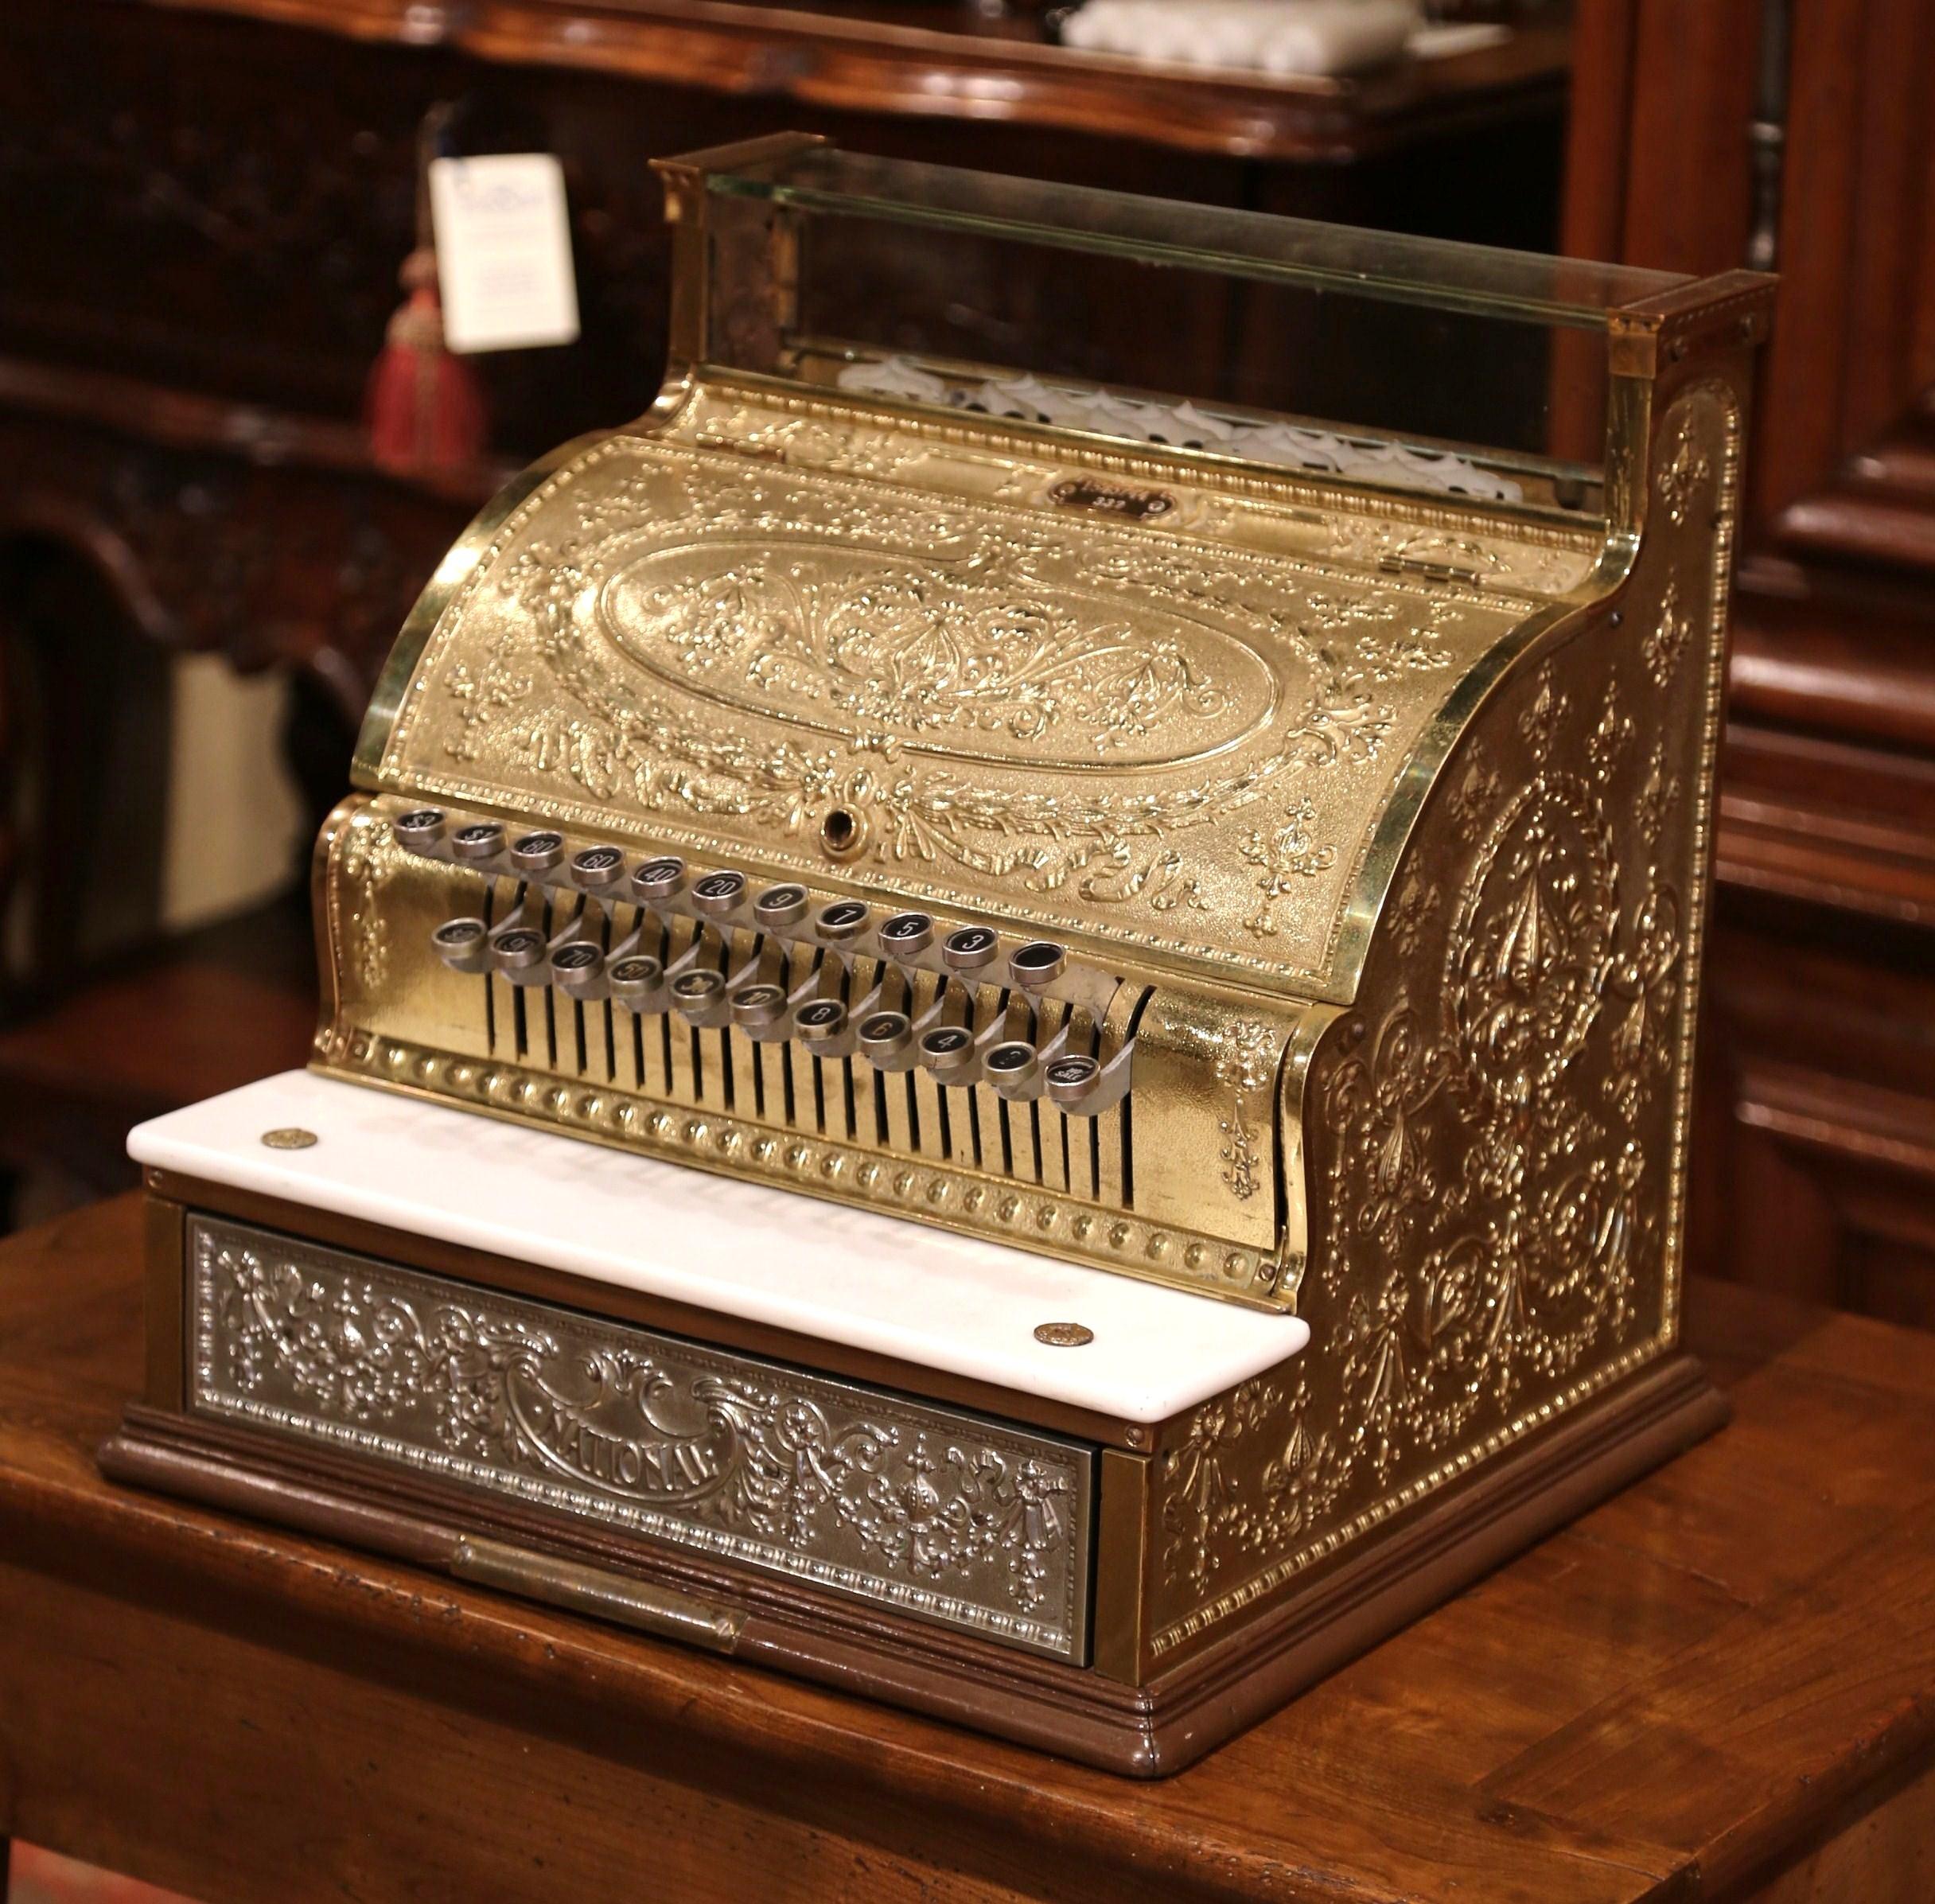 This antique cash register was built circa 1915, made in nickel, brass and marble, the register was restored recently, but for some reasons, the keys are stuck and the piece needs some attention. The cash register is in good condition with a rich